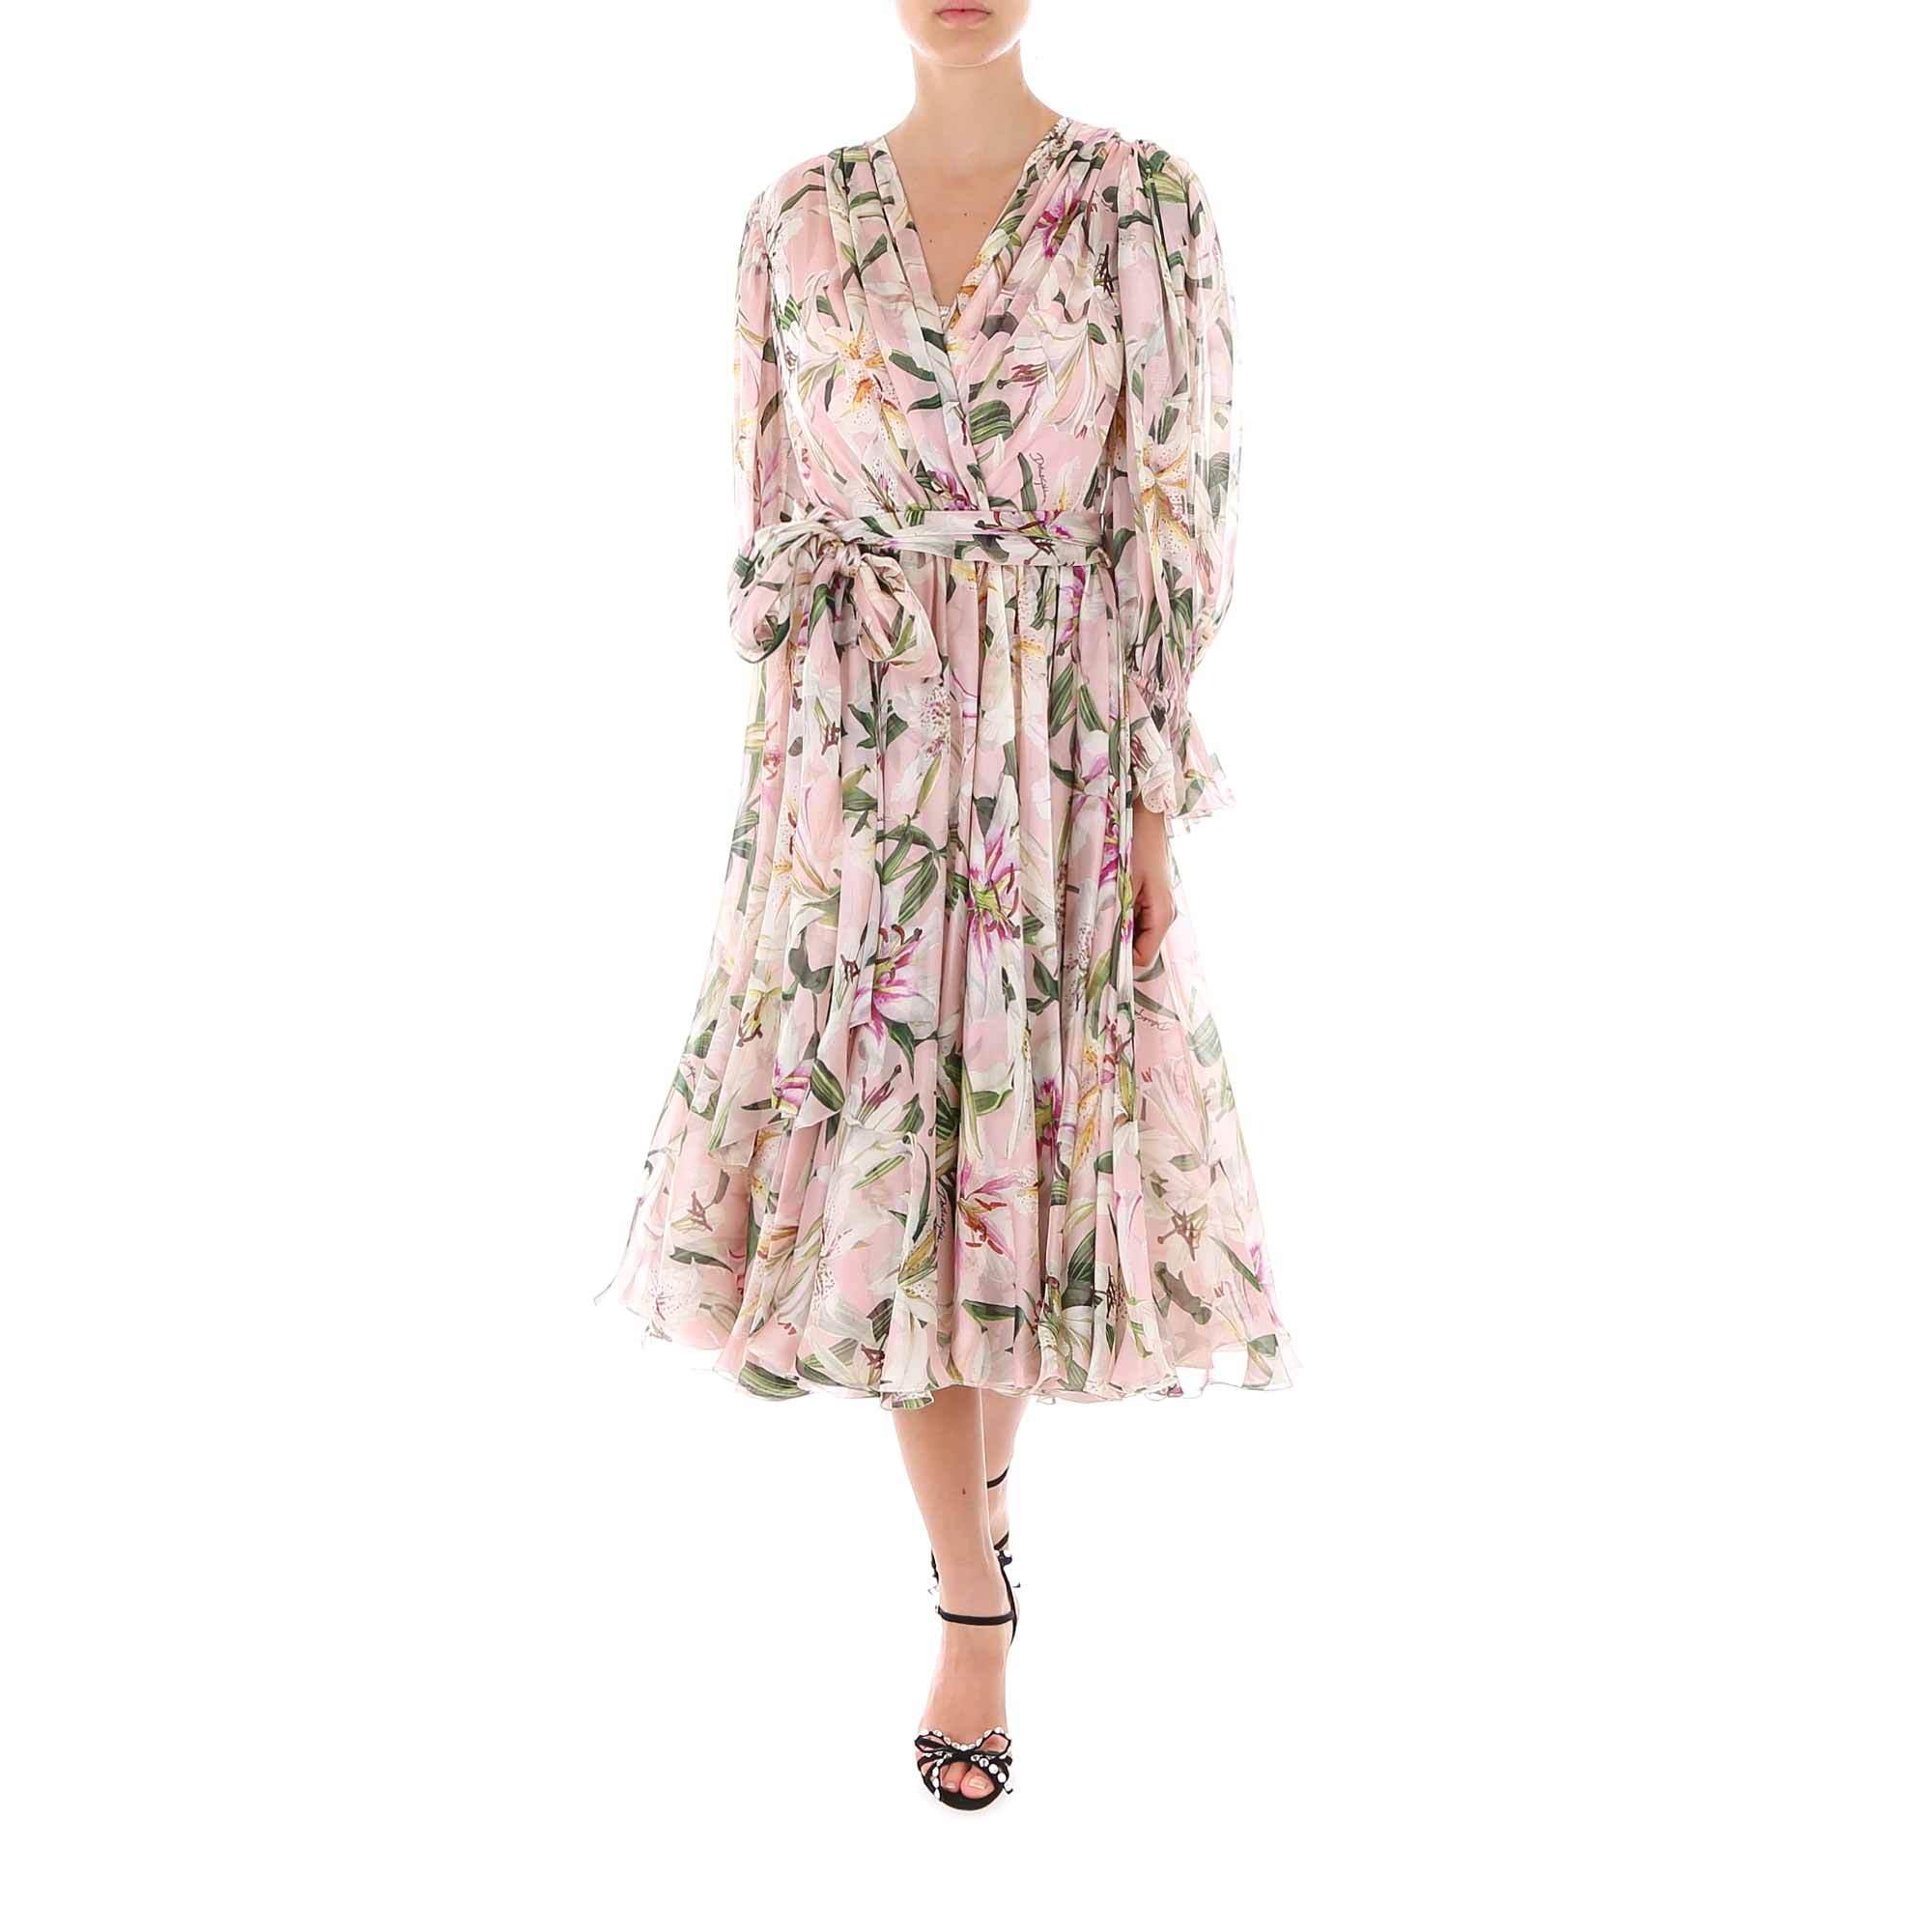 Dolce & Gabbana Silk Floral Printed Flared Wrap Dress in Pink - Save 19